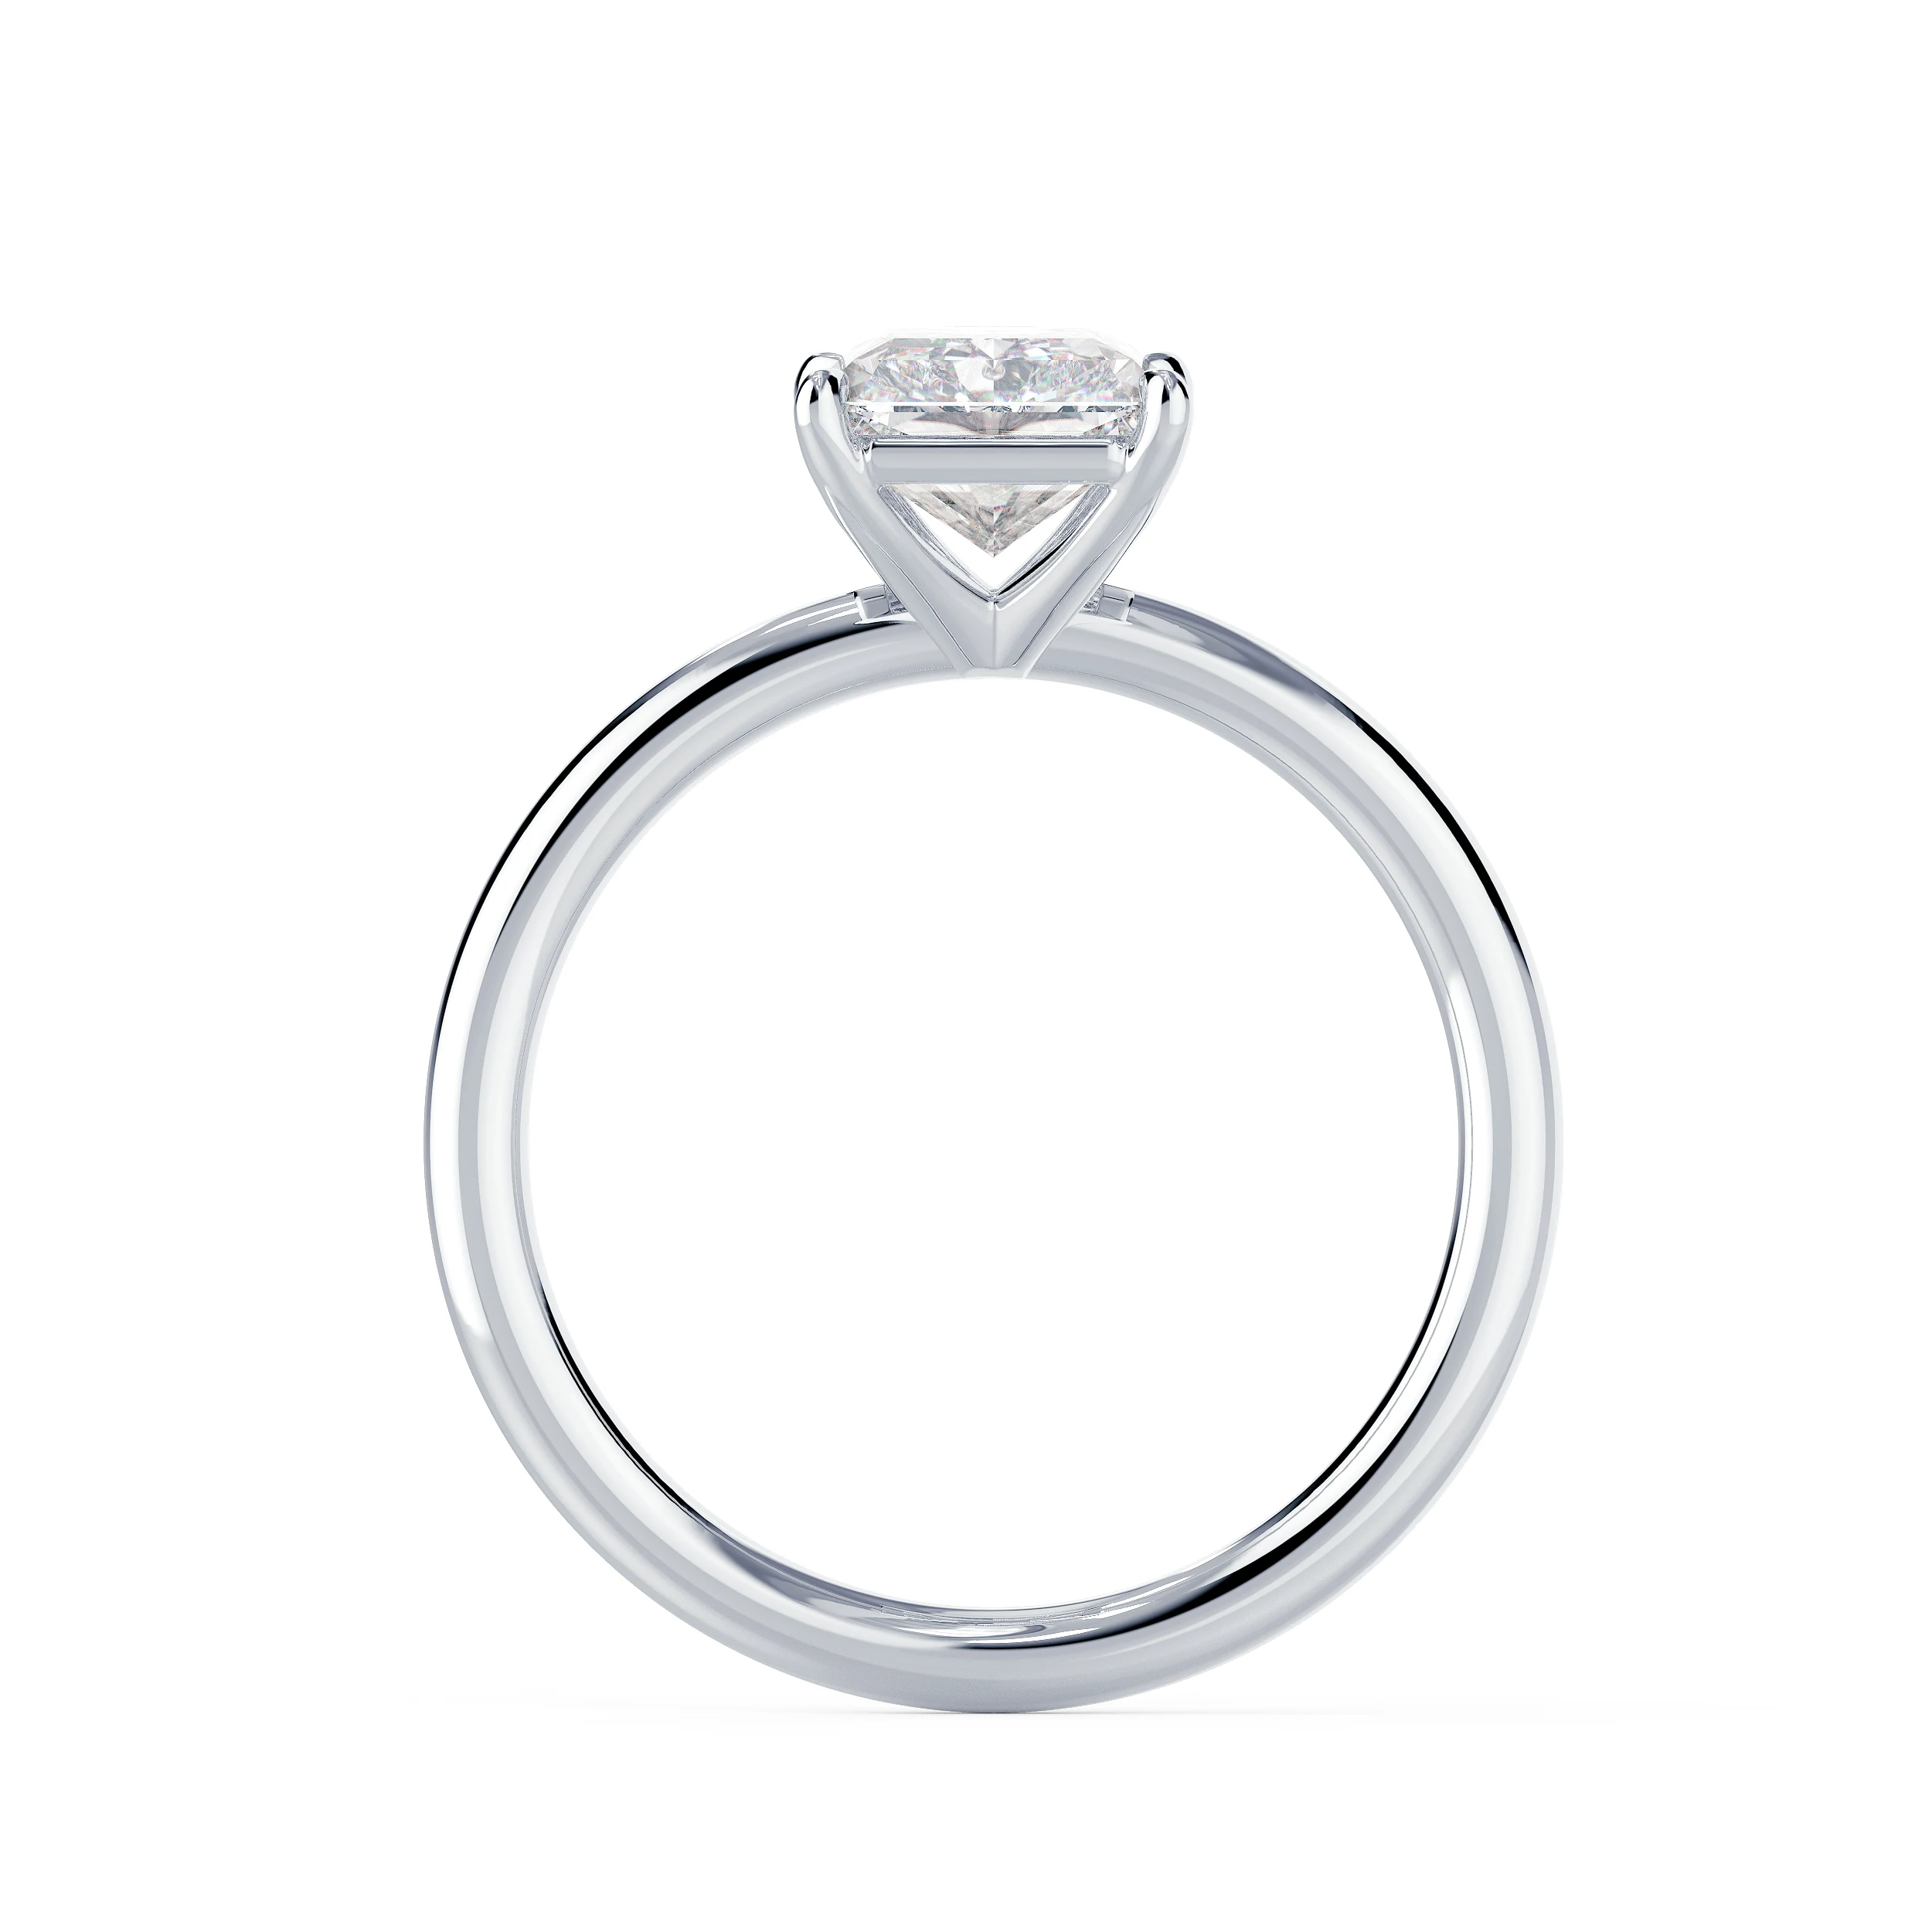 Exceptional Quality Diamonds set in White Gold Radiant Petite Four Prong Solitaire (Profile View)